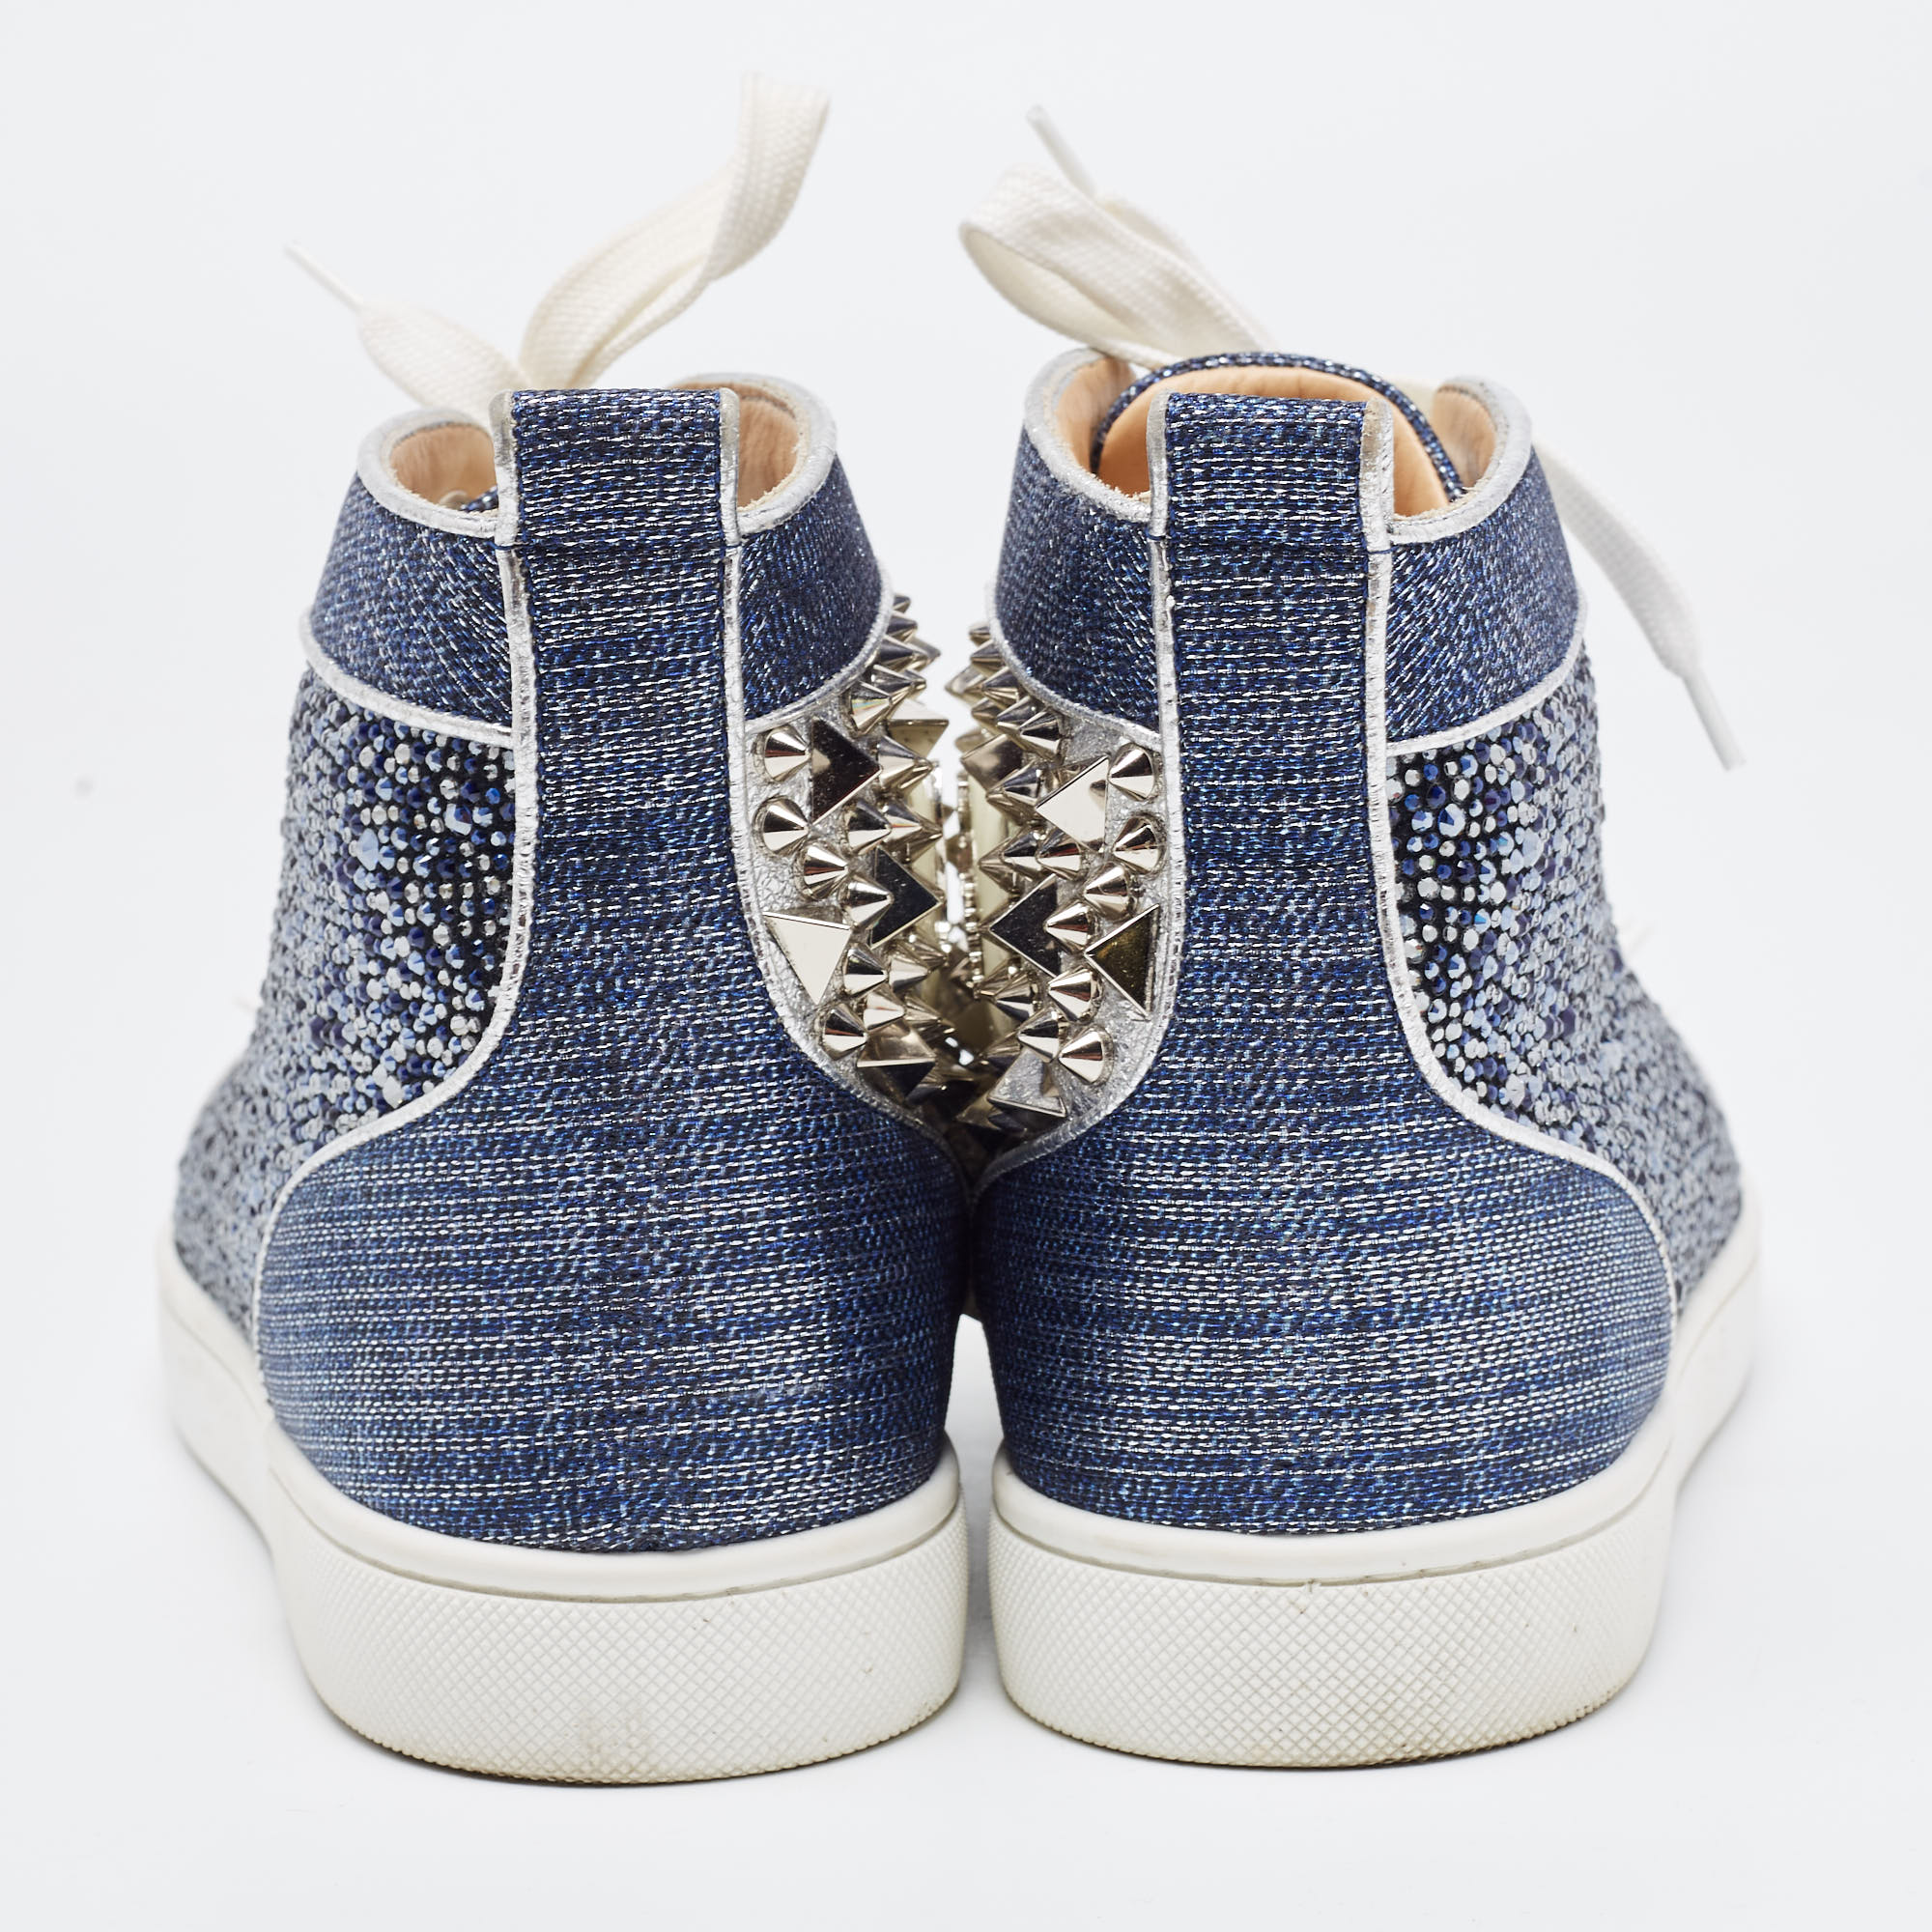 Christian Louboutin Blue/Silver Denim And Patent Lou Degra Spikes Studded Hi High Top Sneakers Size 39